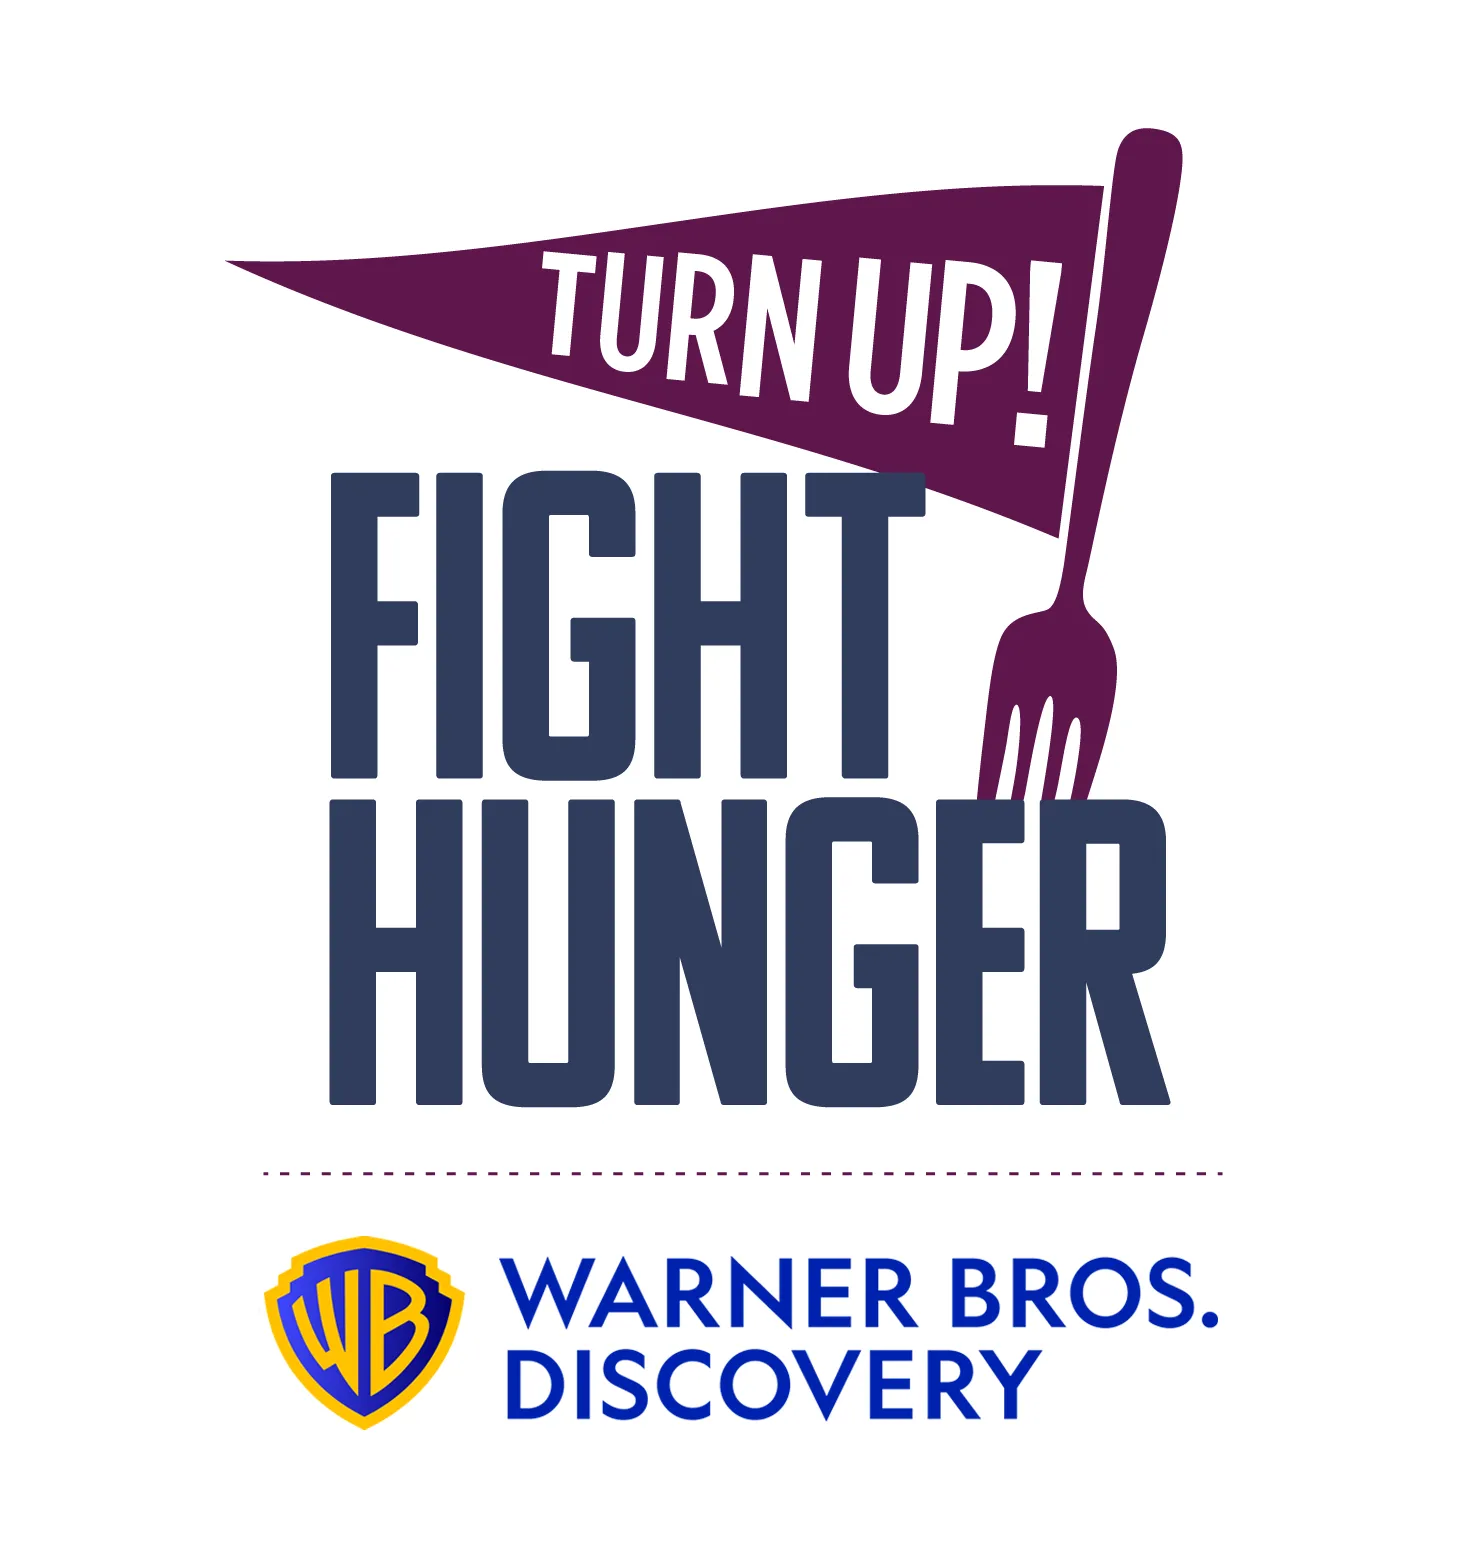 Turn Up to fight hunger